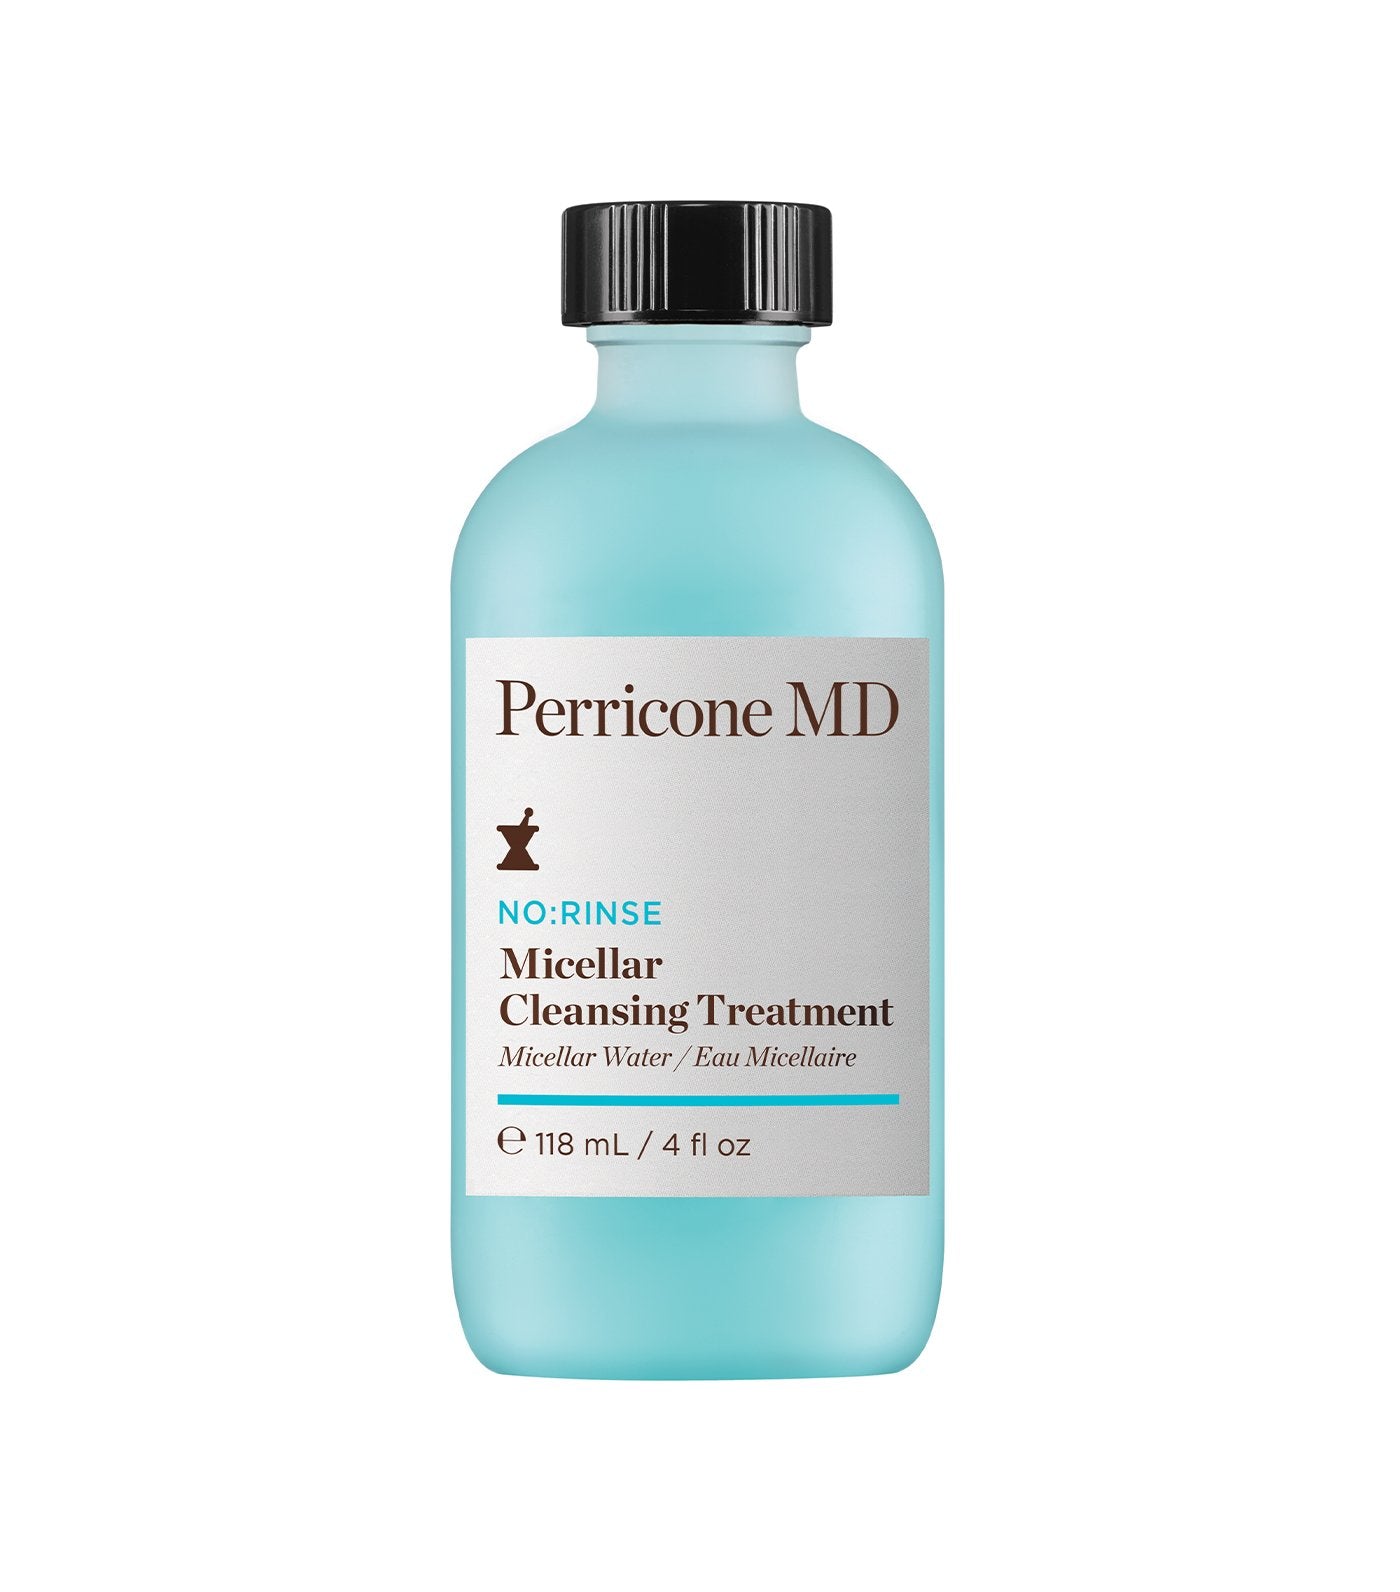 perricone md no:rinse micellar cleansing treatment